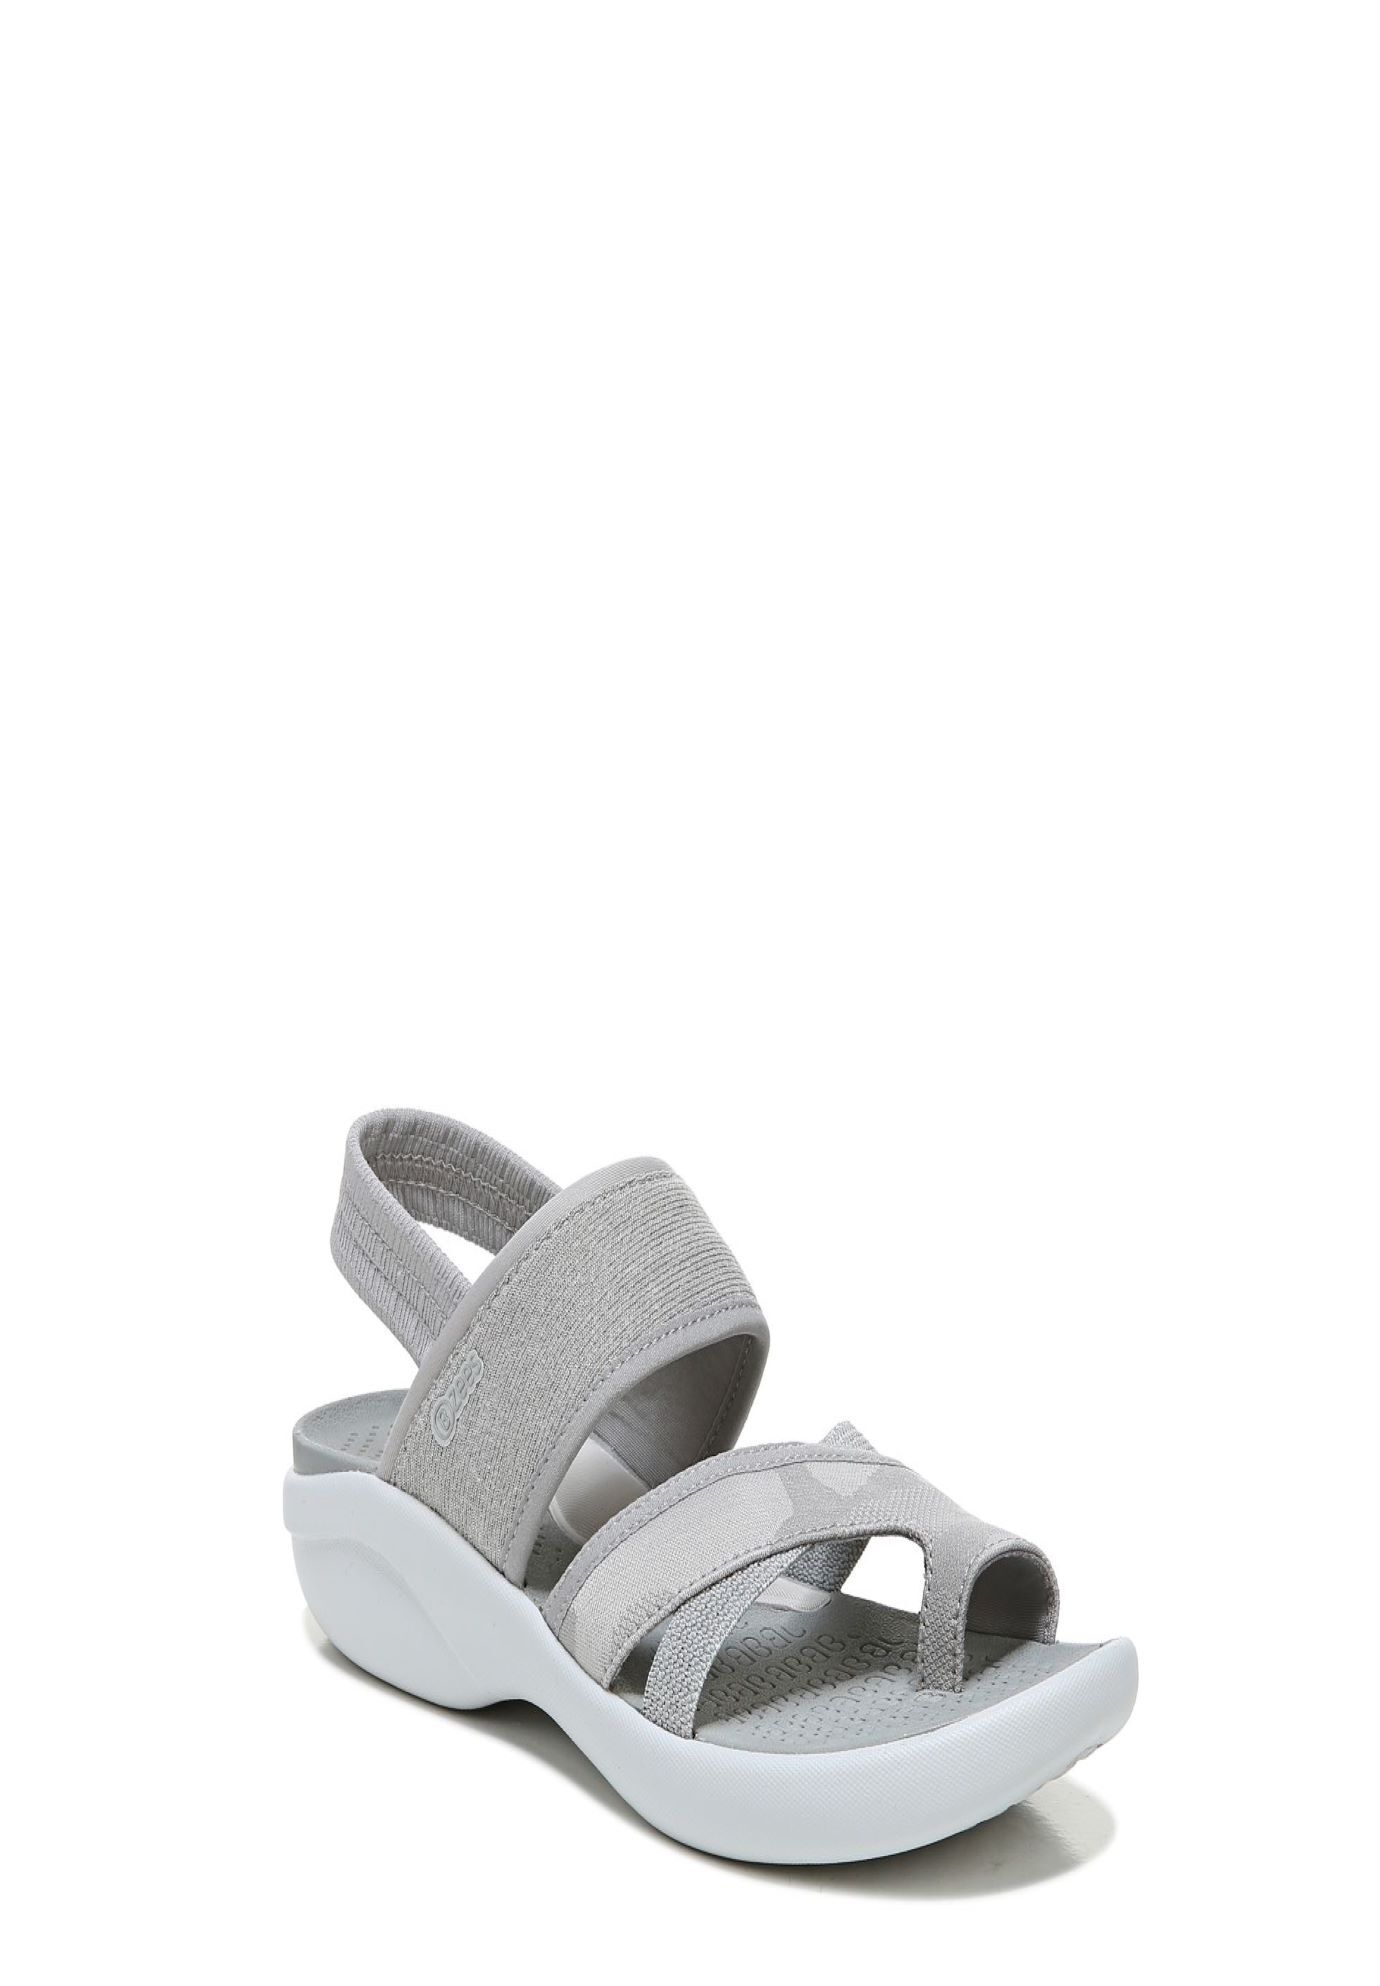 Wide Width Women's Call Me Sandals by BZees in Grey (Size 9 W)